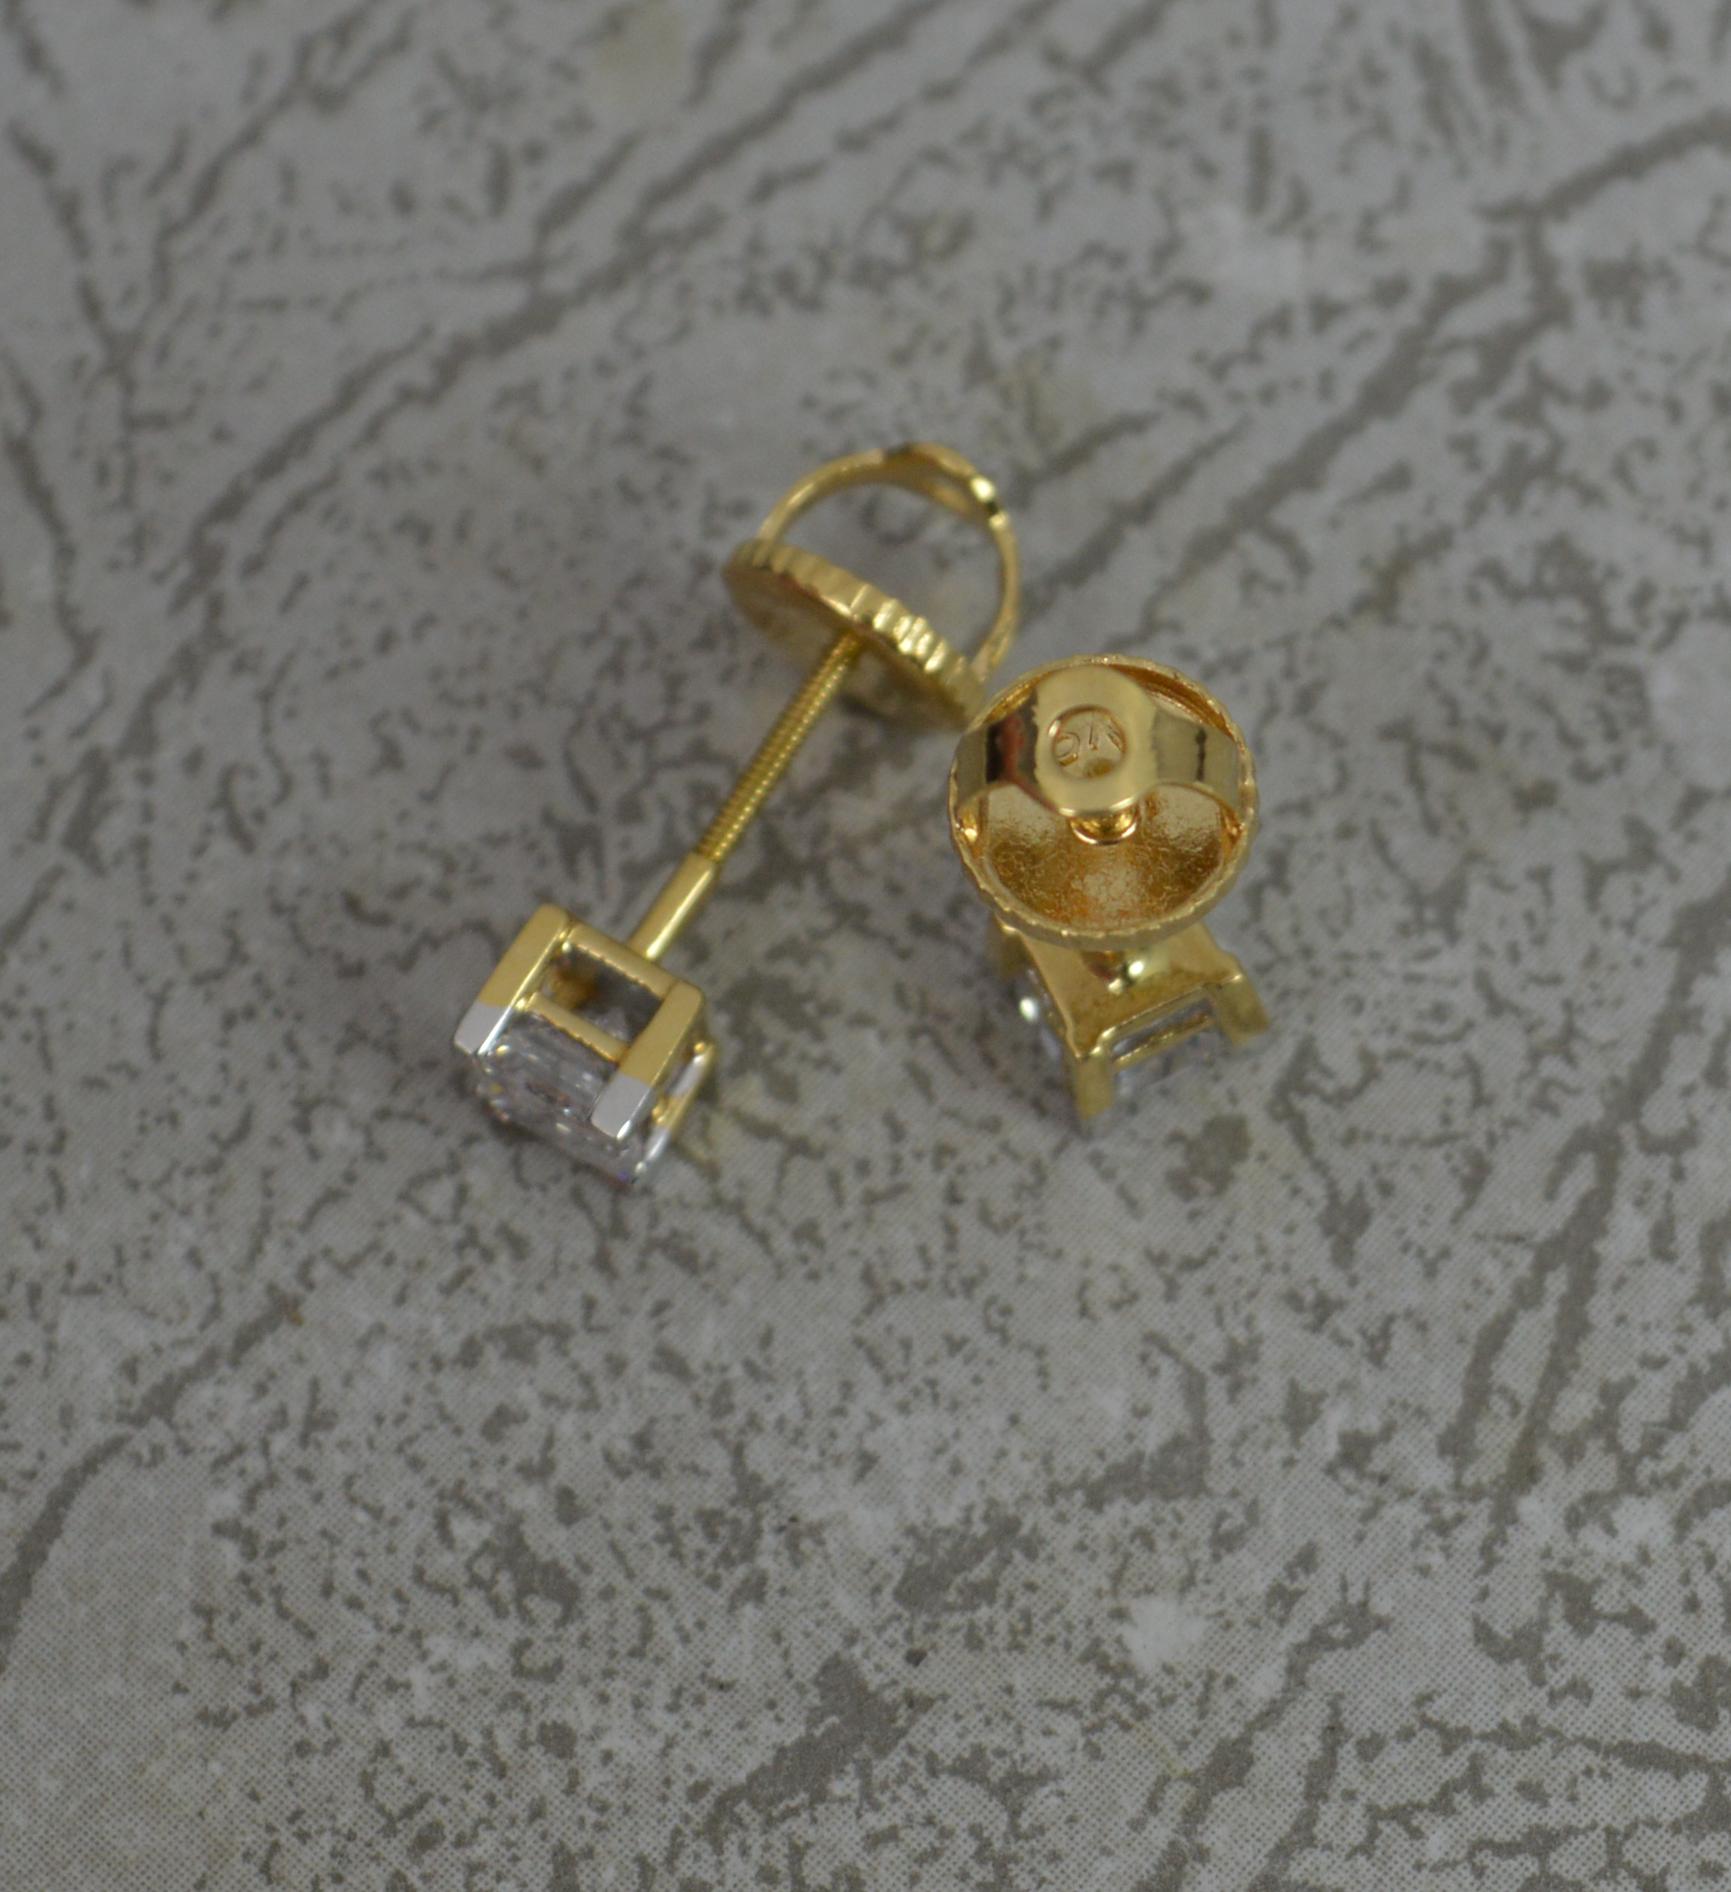 A superb pair of diamond single stud earrings.
Solid 18 carat yellow gold settings and backs.
Pierced, screw backs.
Each set with a natural, princess cut diamond in four claw setting. 1.00 carat total weight. Estimated vs clarity, g-h